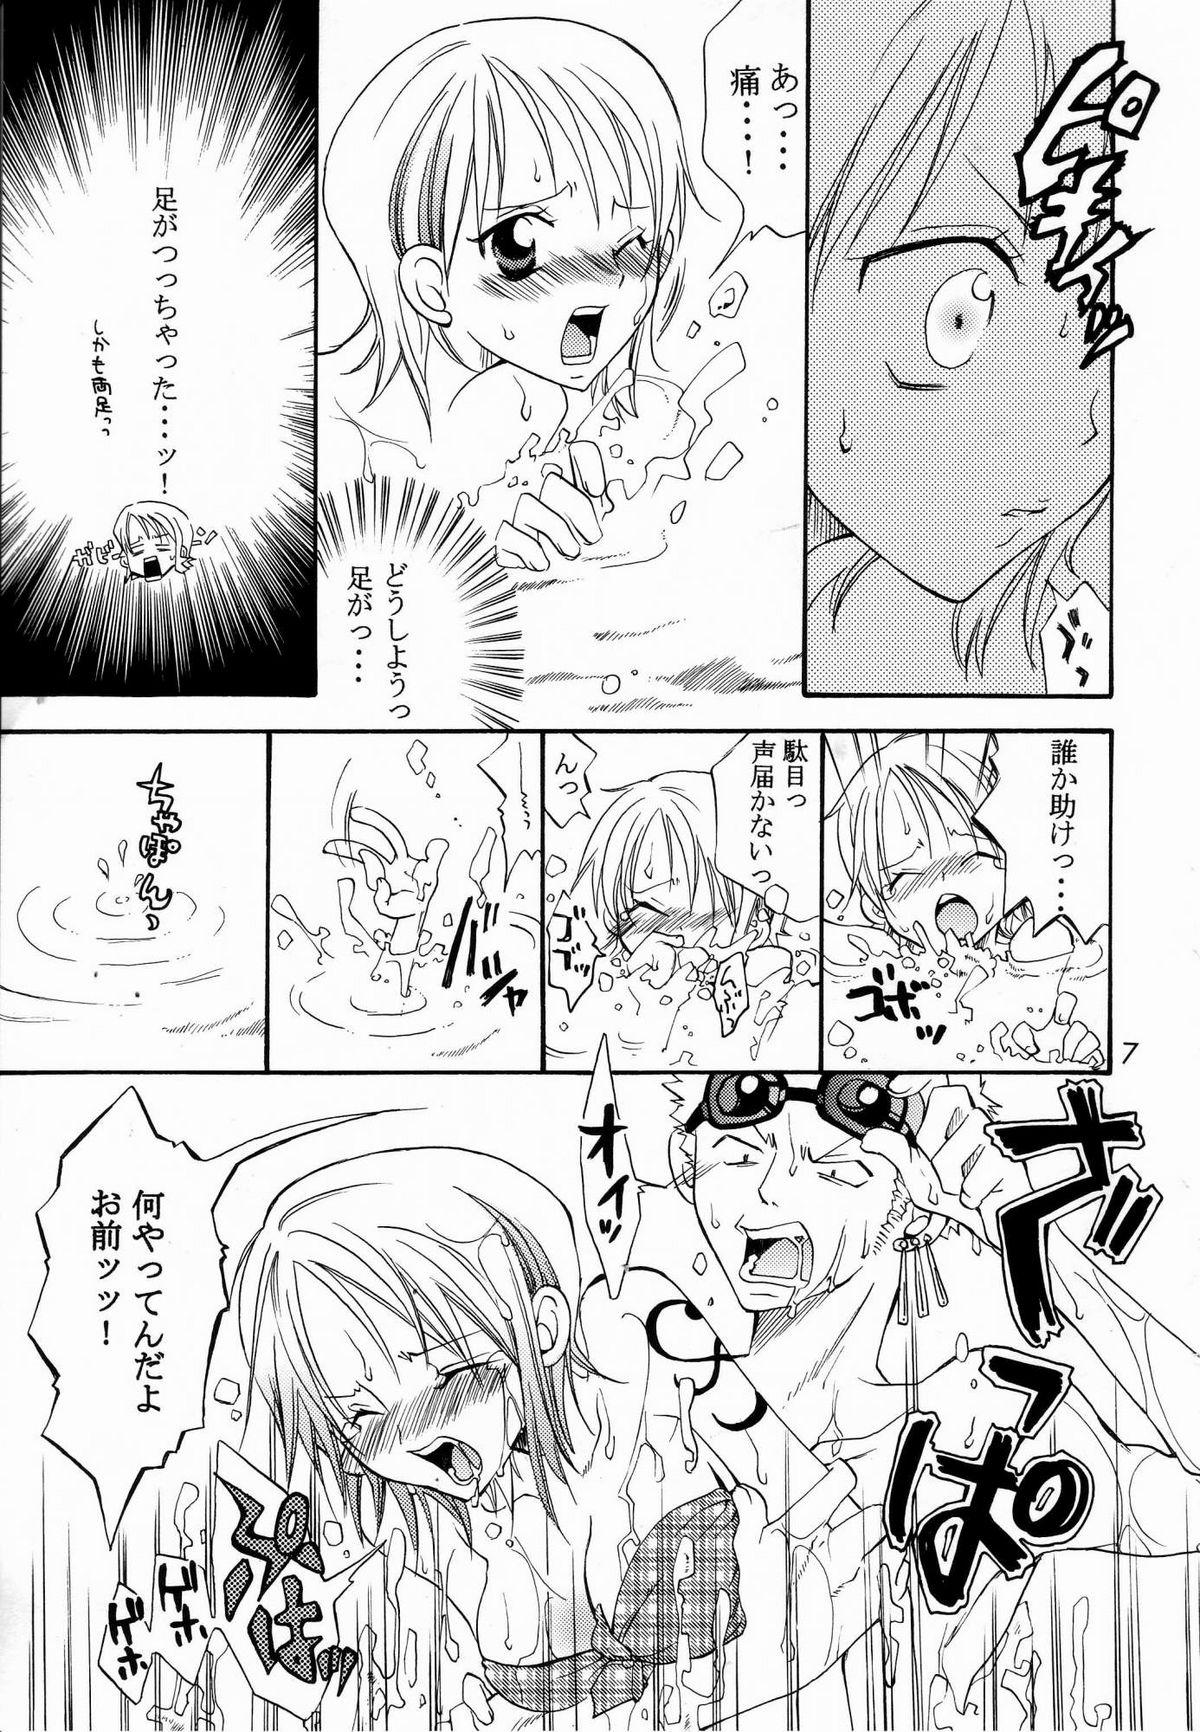 Tight Pussy Fuck Shiawase Punch! 5 - One piece Exgf - Page 6